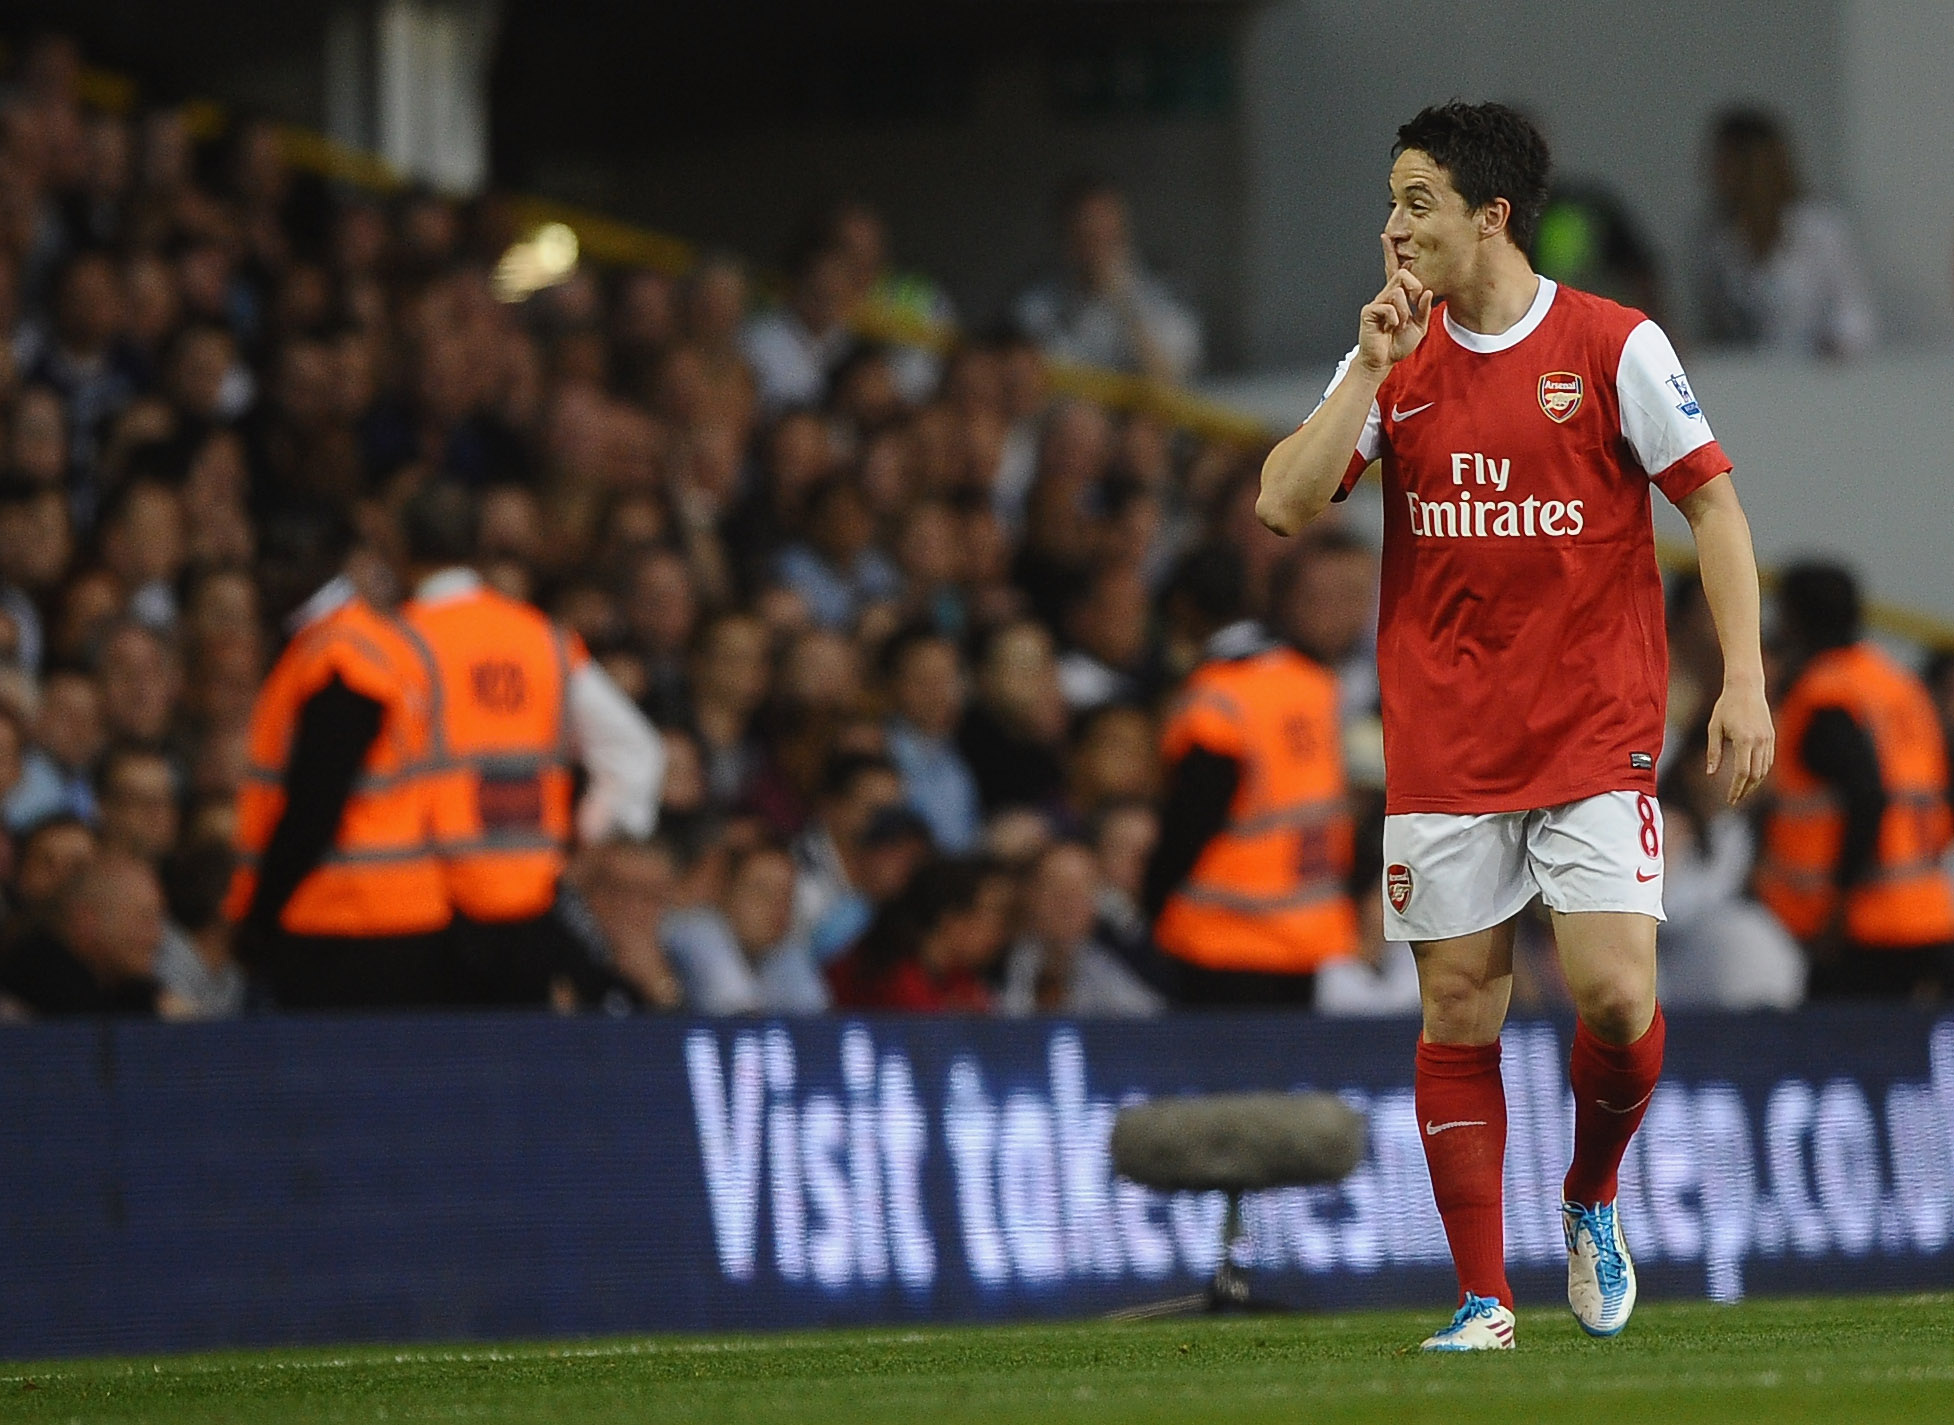 LONDON, ENGLAND - APRIL 20:  Samir Nasri of Arsenal gestures to the Spurs fans after scoring their second goal during the Barclays Premier League match between Tottenham Hotspur and Arsenal at White Hart Lane on April 20, 2011 in London, England.  (Photo